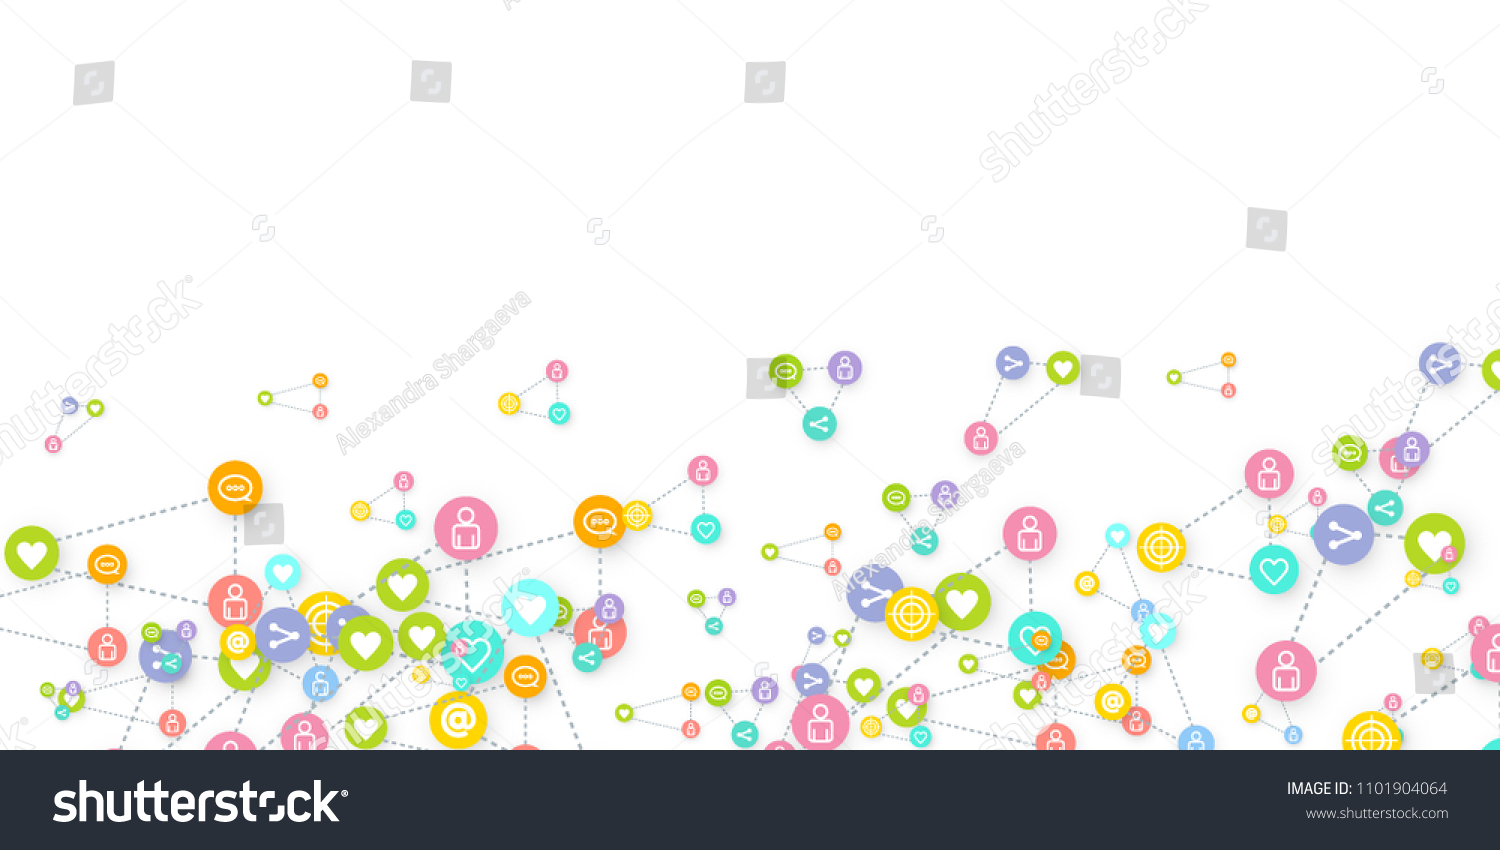 Social media marketing, Communication networking concept. Random icons social media services tags linked on white background. Comment, friend, like, share, target, message. Vector Internet concept. #1101904064